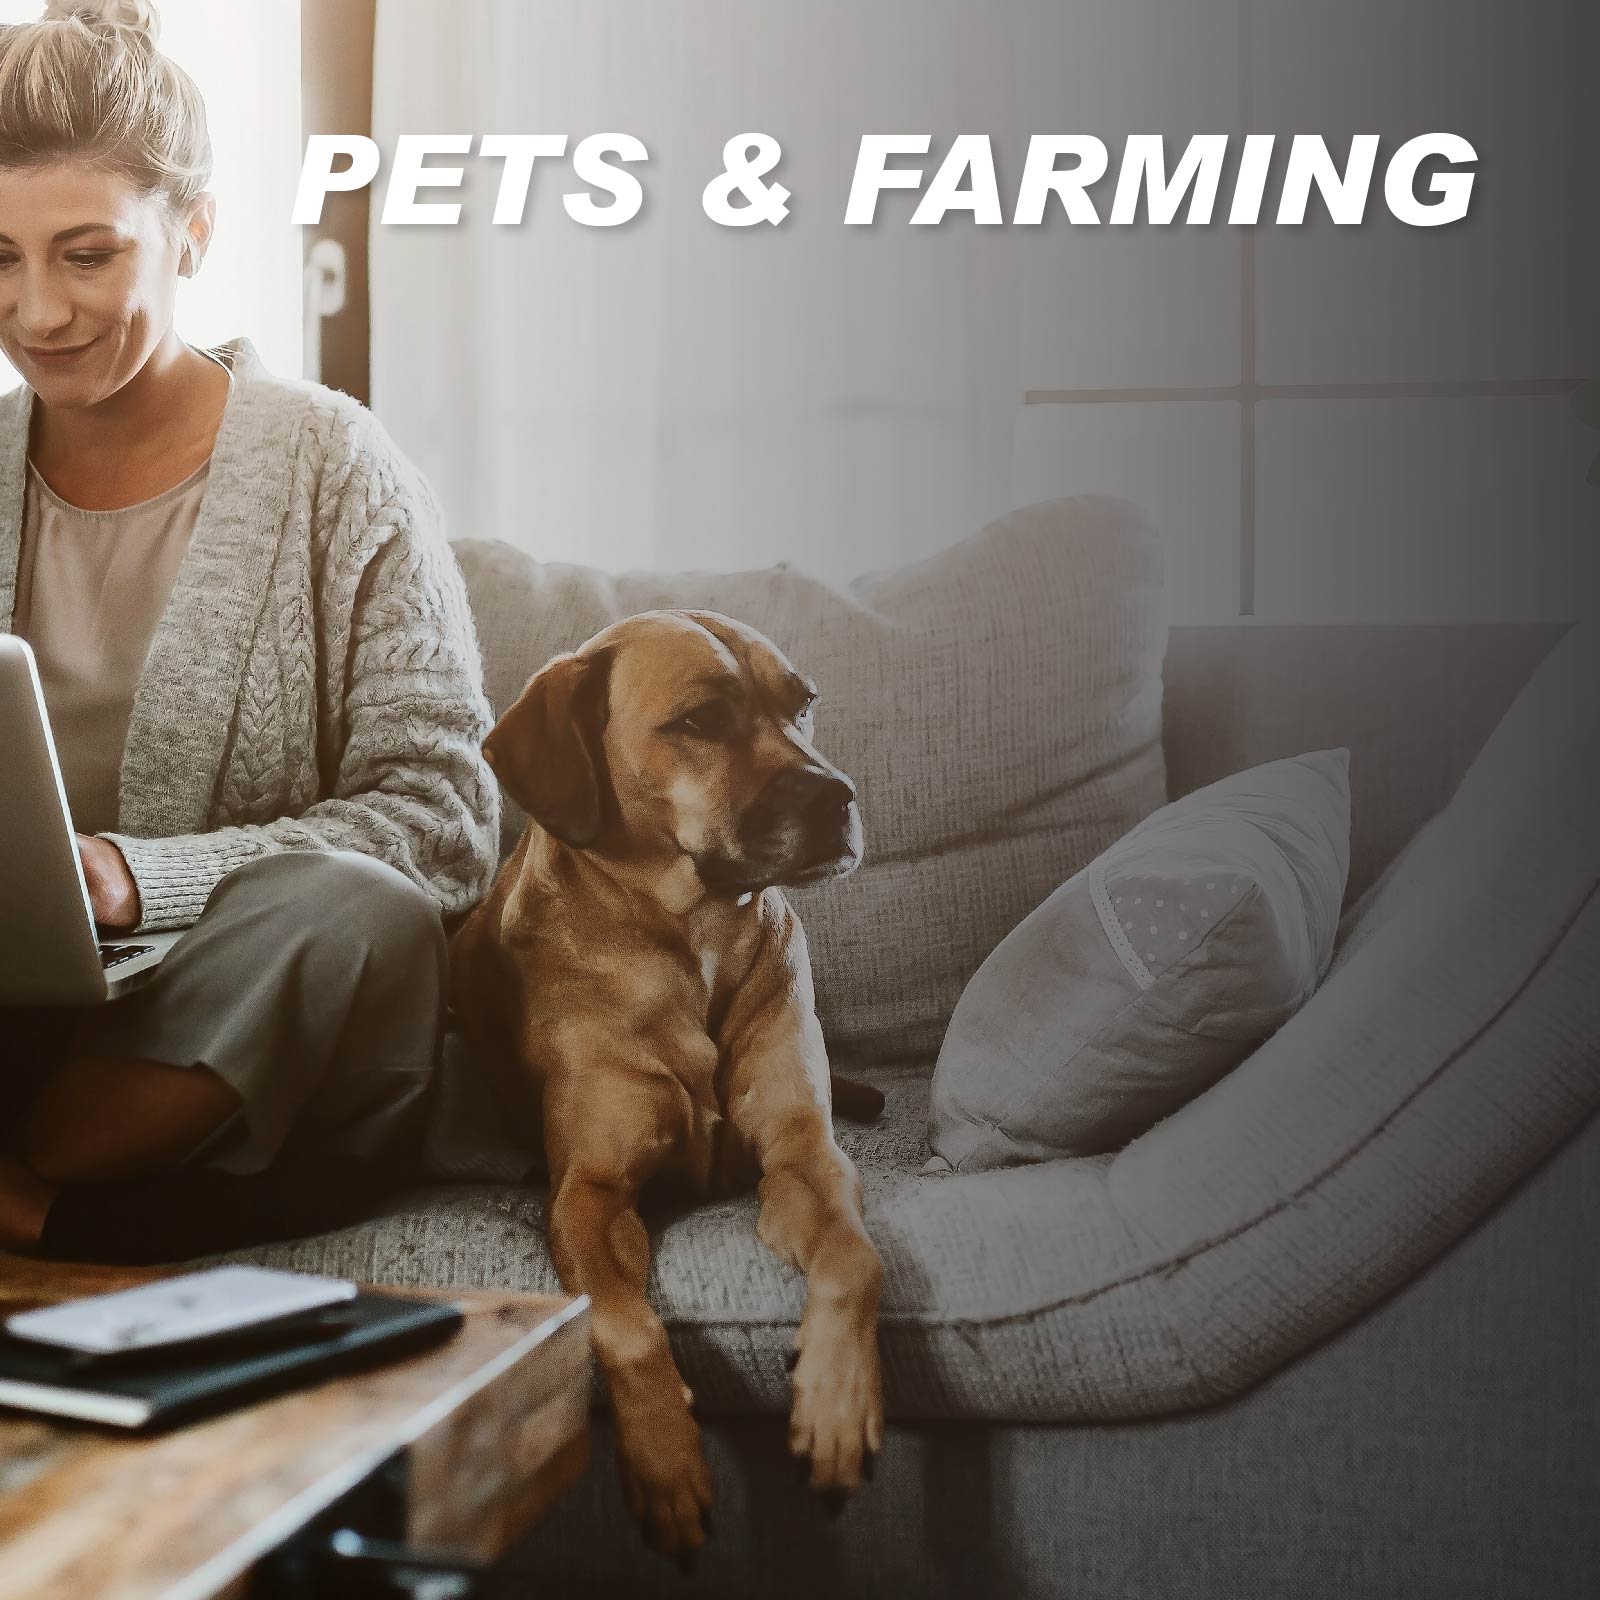 Cleaning Products for Pets & Farming